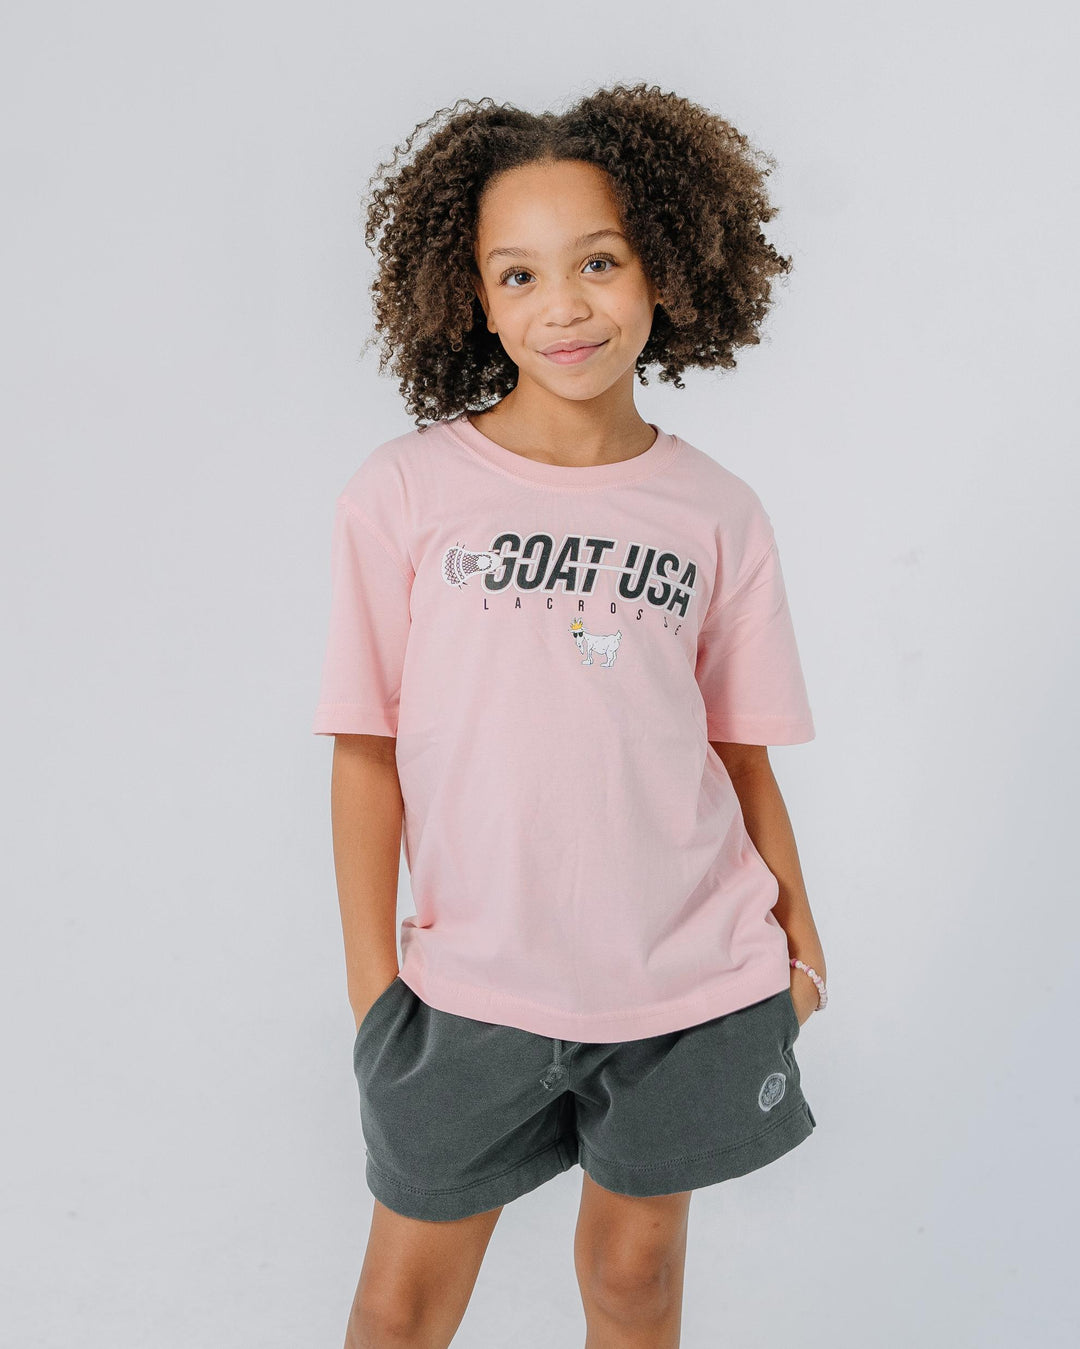 Girl wearing pink shirt with lacrosse stick that goes through the wording "GOAT USA"#color_pink